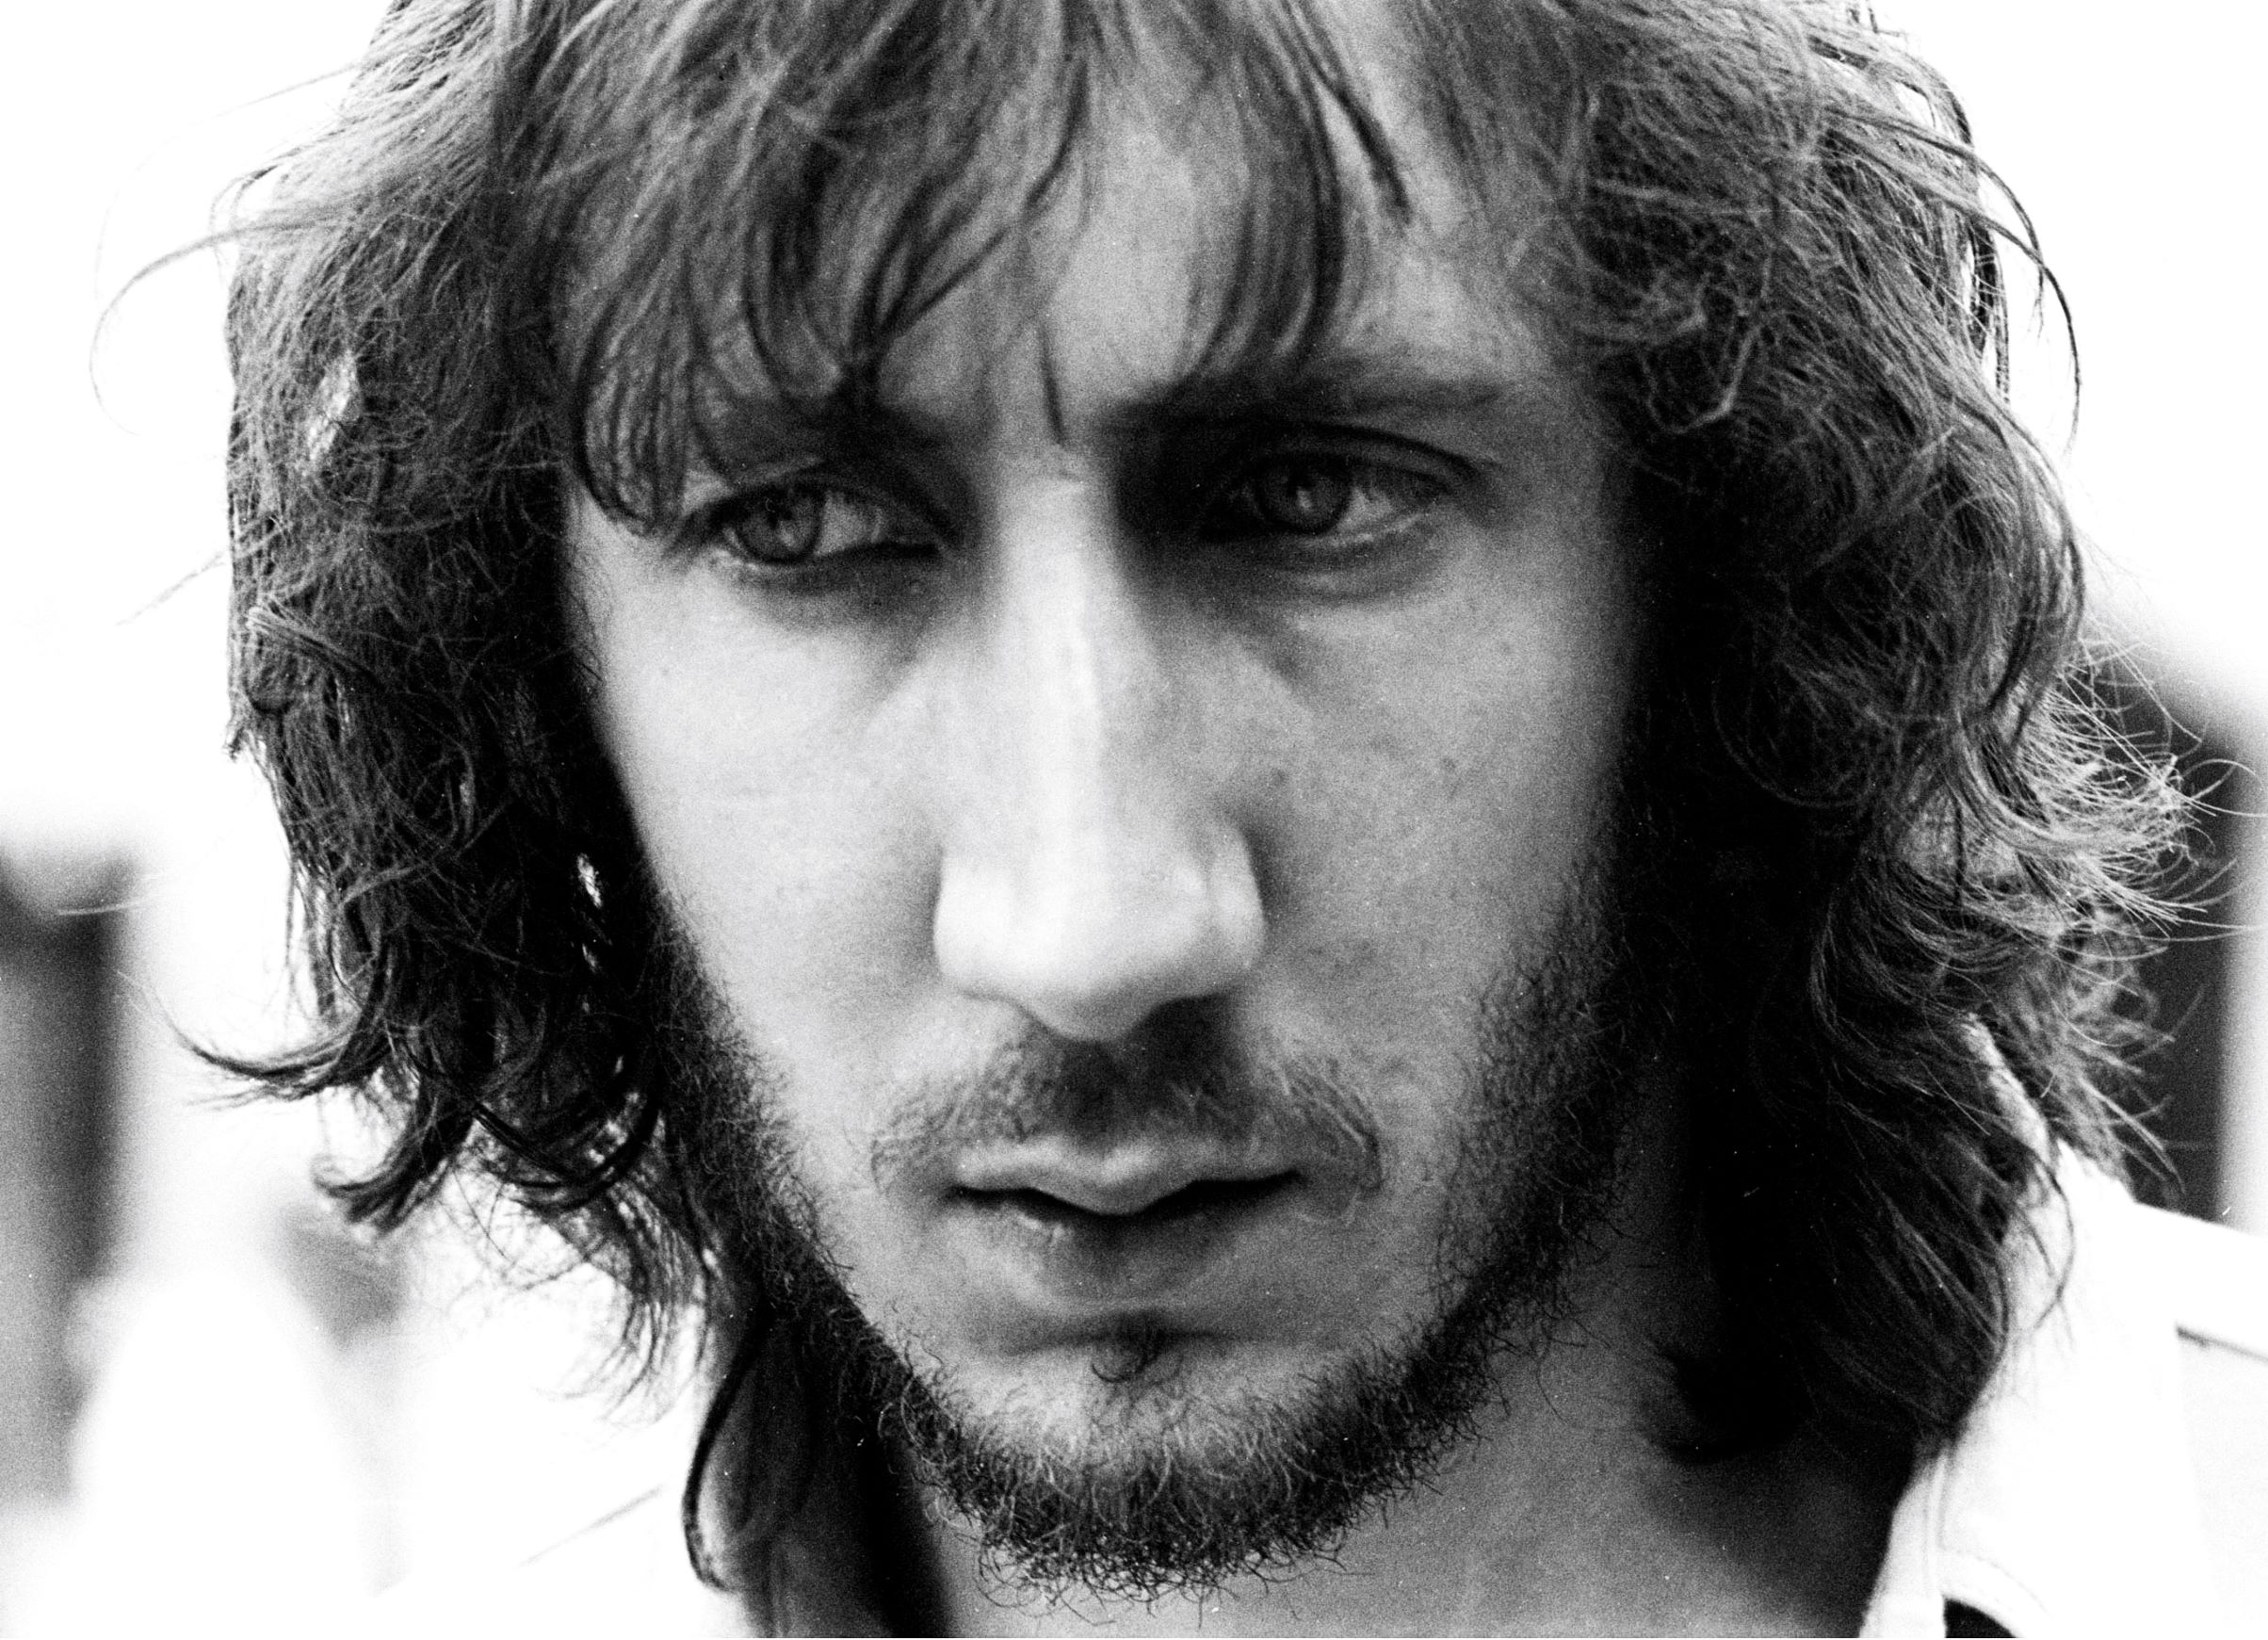 Who is Pete Townshend with a beard